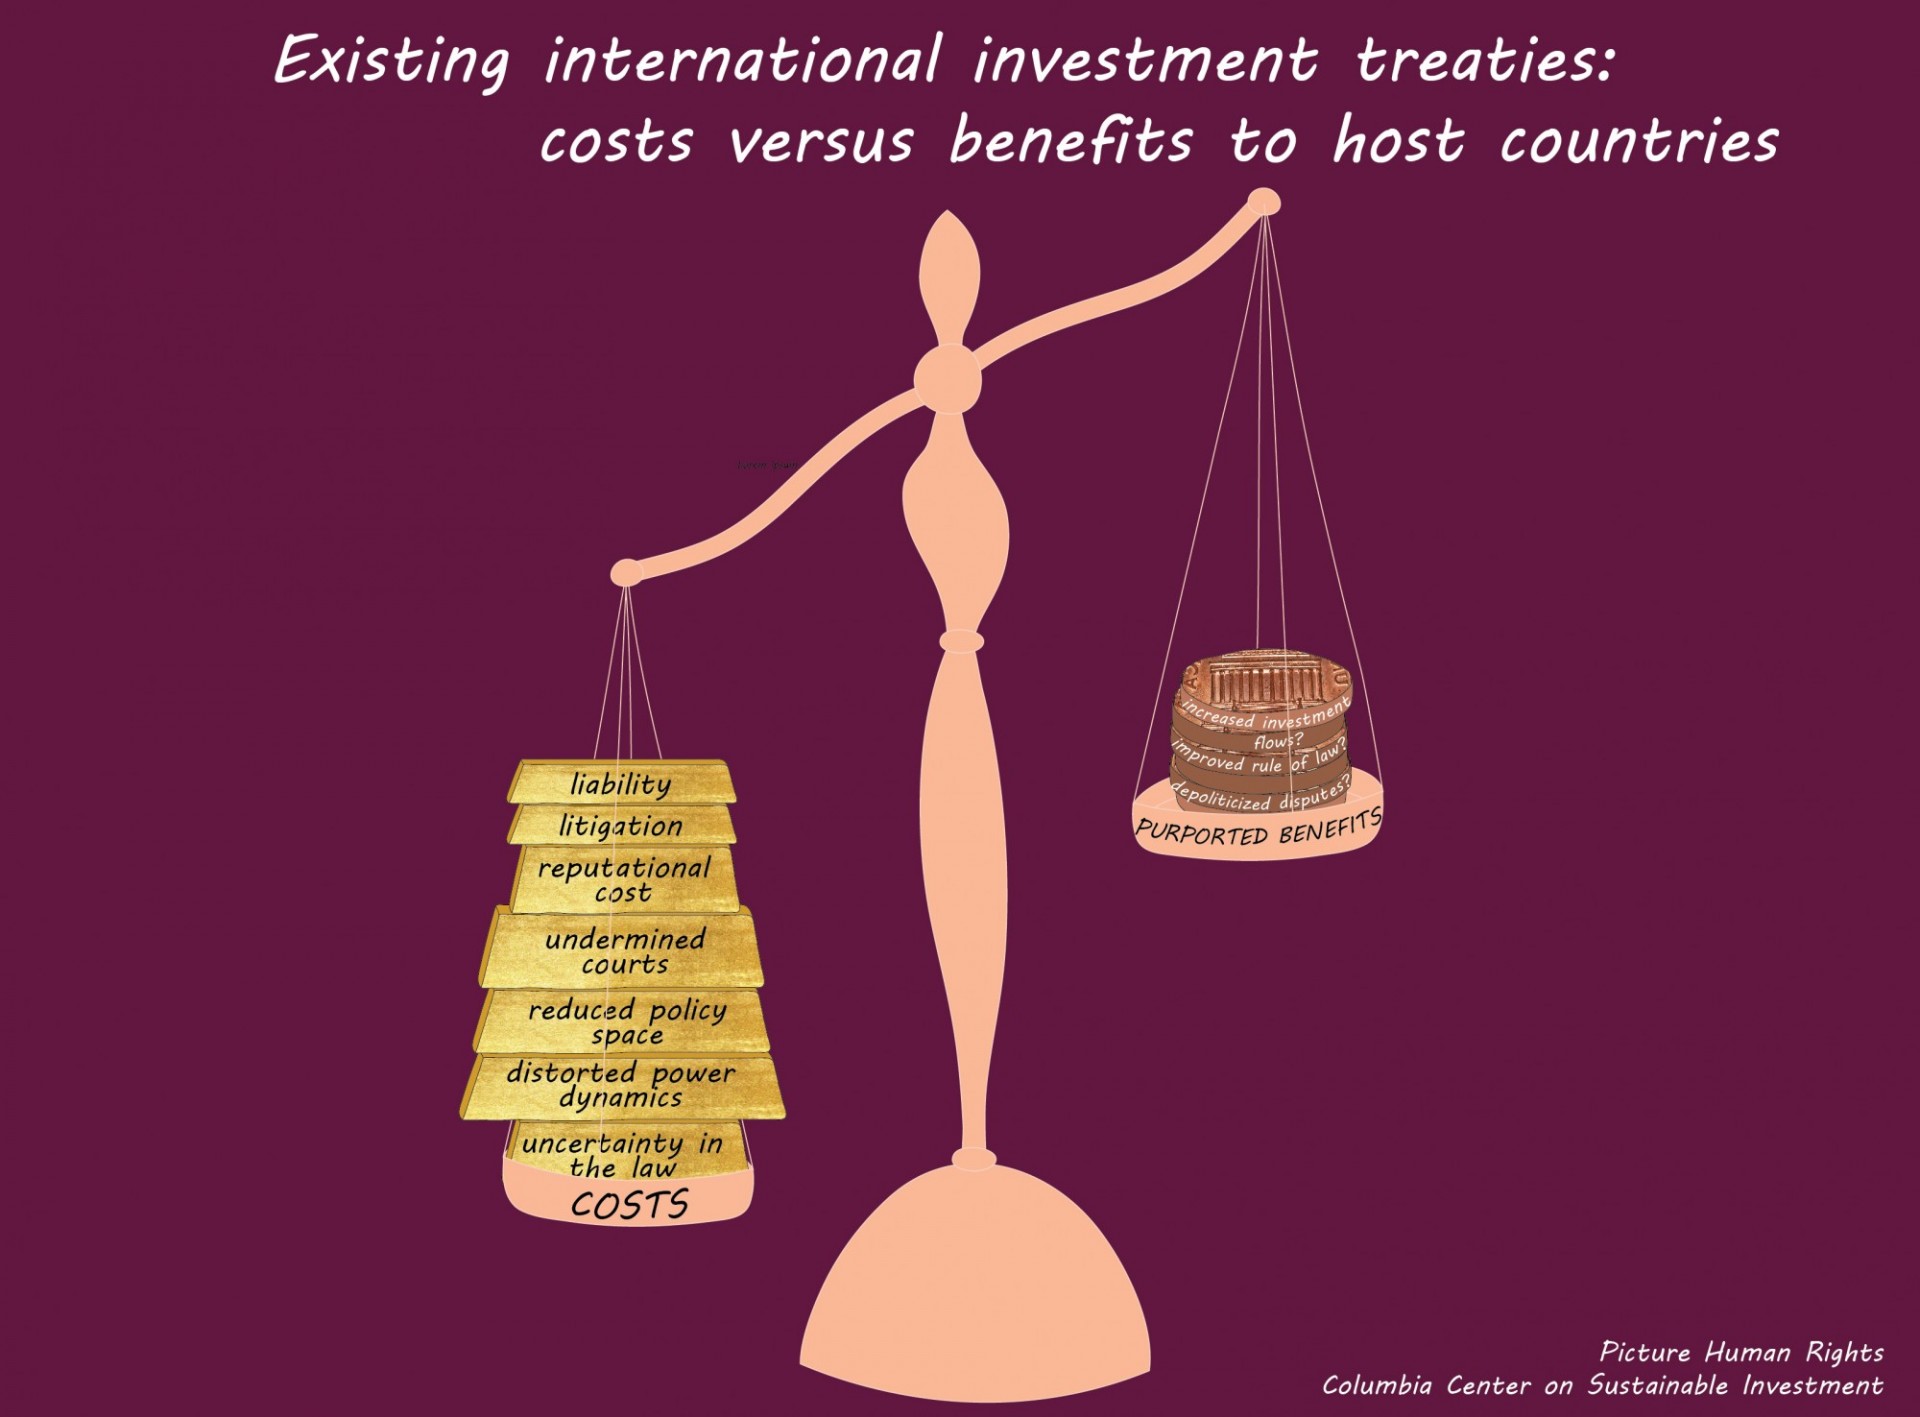 Graphic of a scale titled "Existing international investment treaties: costs versus benefits to host countries". Left side of scale is labeled "COSTS" and holds pieces of gold labeled "liability," "litigation," "reputational cost," "undermined courts," "reduced policy space," "distorted power dynamics," and "uncertainty in the law." Right side of scale is labeled "PURPORTED BENEFITS" and holds copper coins labeled "increased investment flows?", "improved rule of law?", and "depoliticized disputes?".